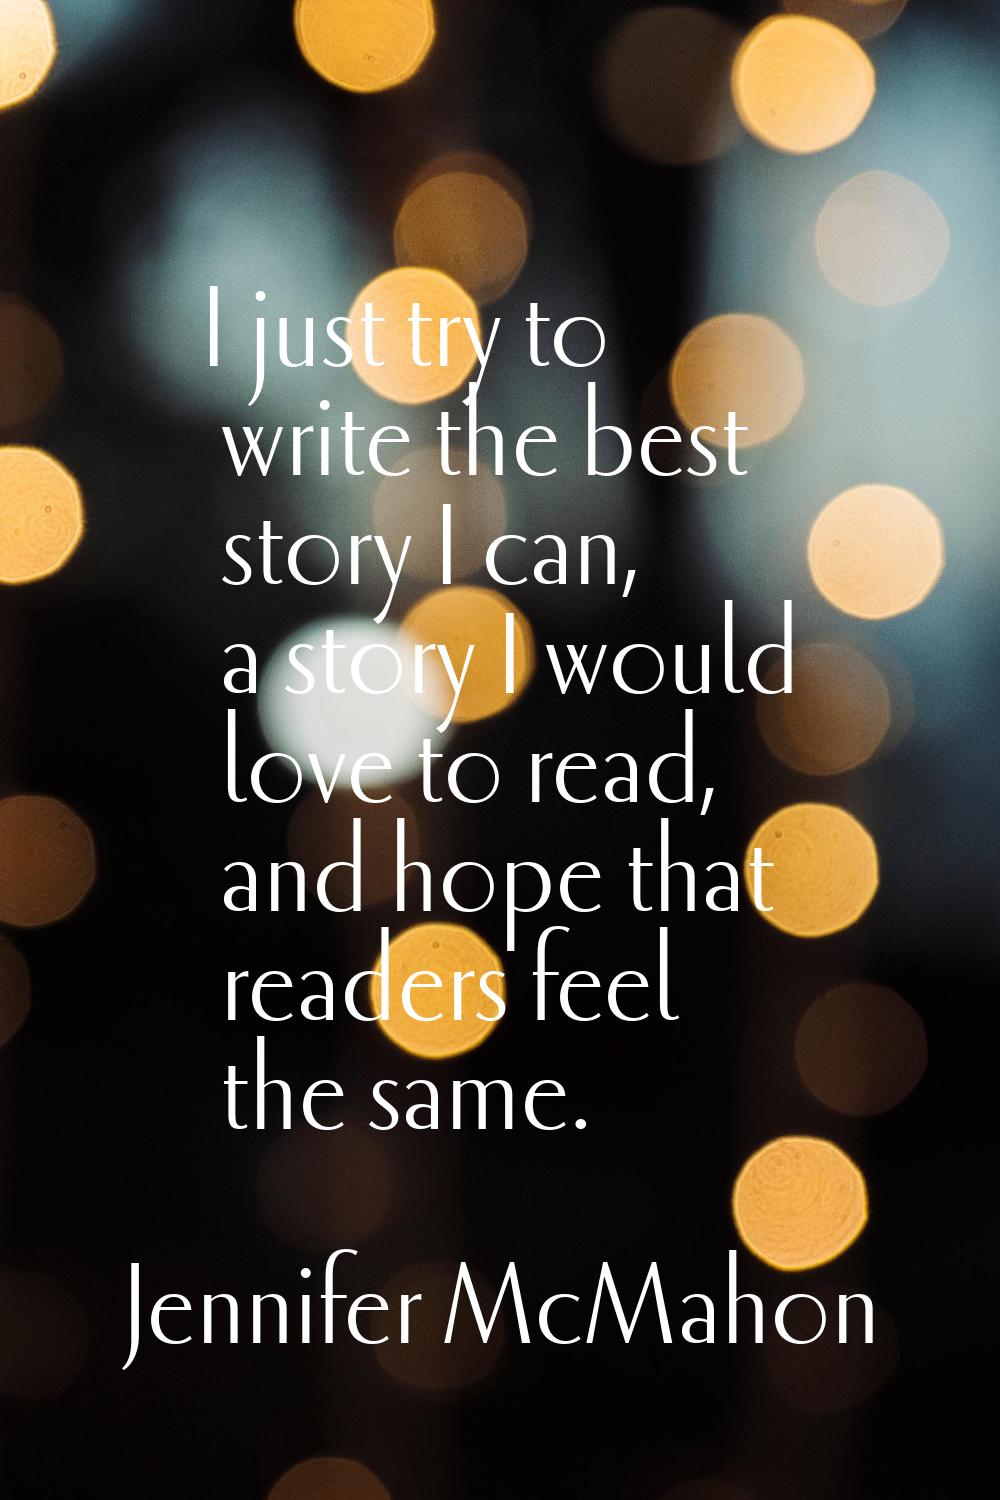 I just try to write the best story I can, a story I would love to read, and hope that readers feel 